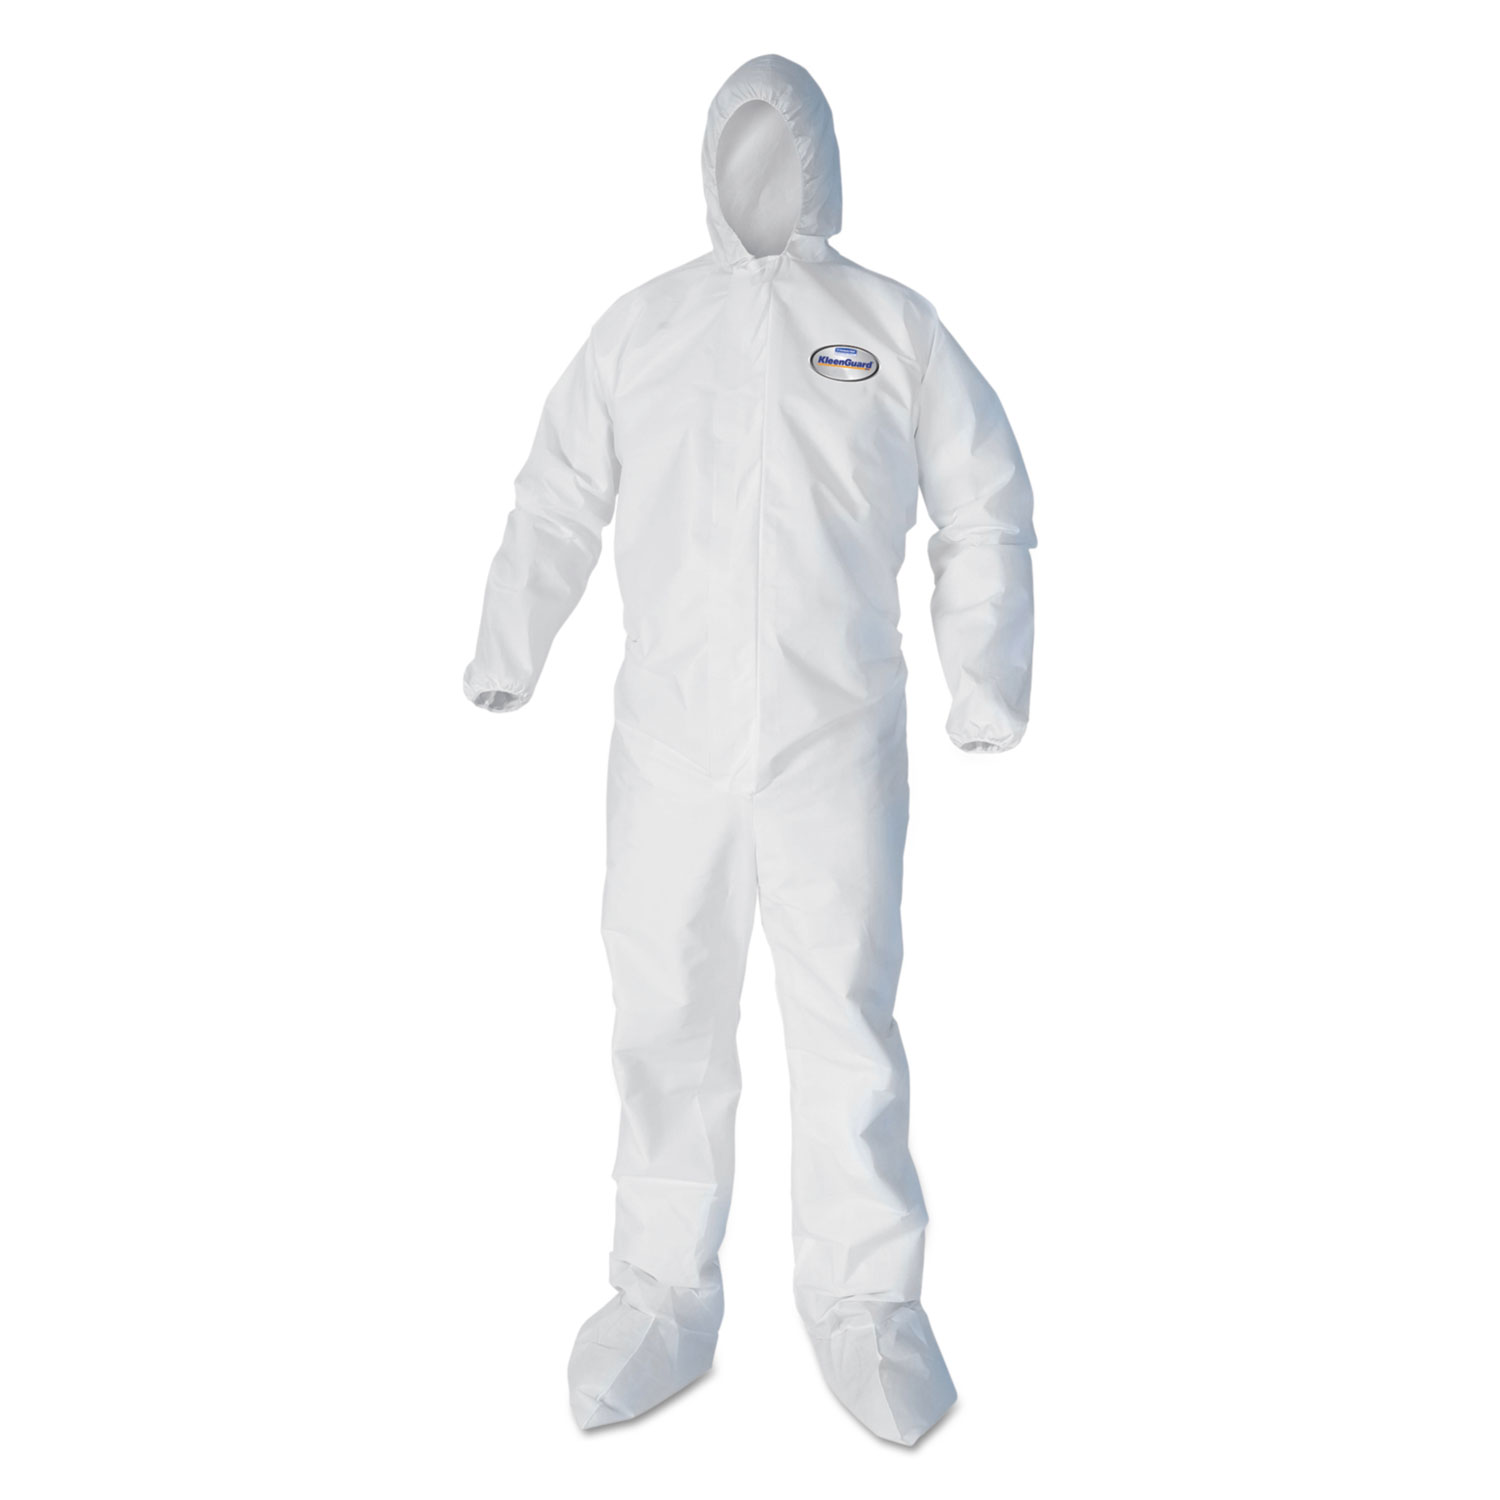 A40 Elastic-Cuff, Ankle, Hood and Boot Coveralls, X-Large, White, 25/Carton